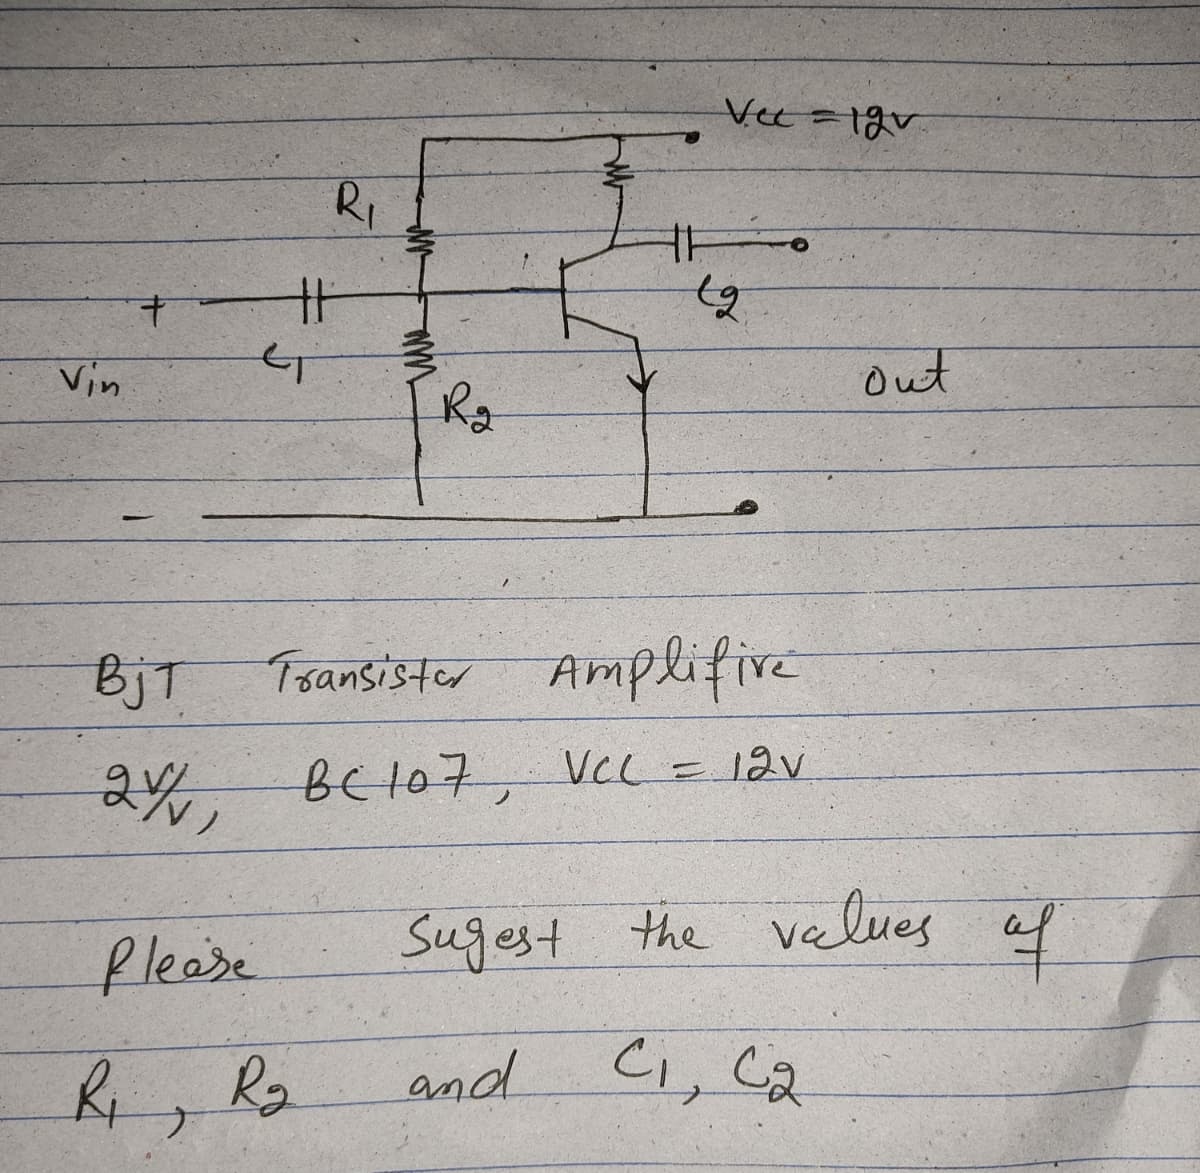 Ri
廿
Vin
Out
Ro
BjT
Tsansister Amplifive
BE107, VcL=12v
flease
Sugest the velues af
R, Rg
and Ci, ca
